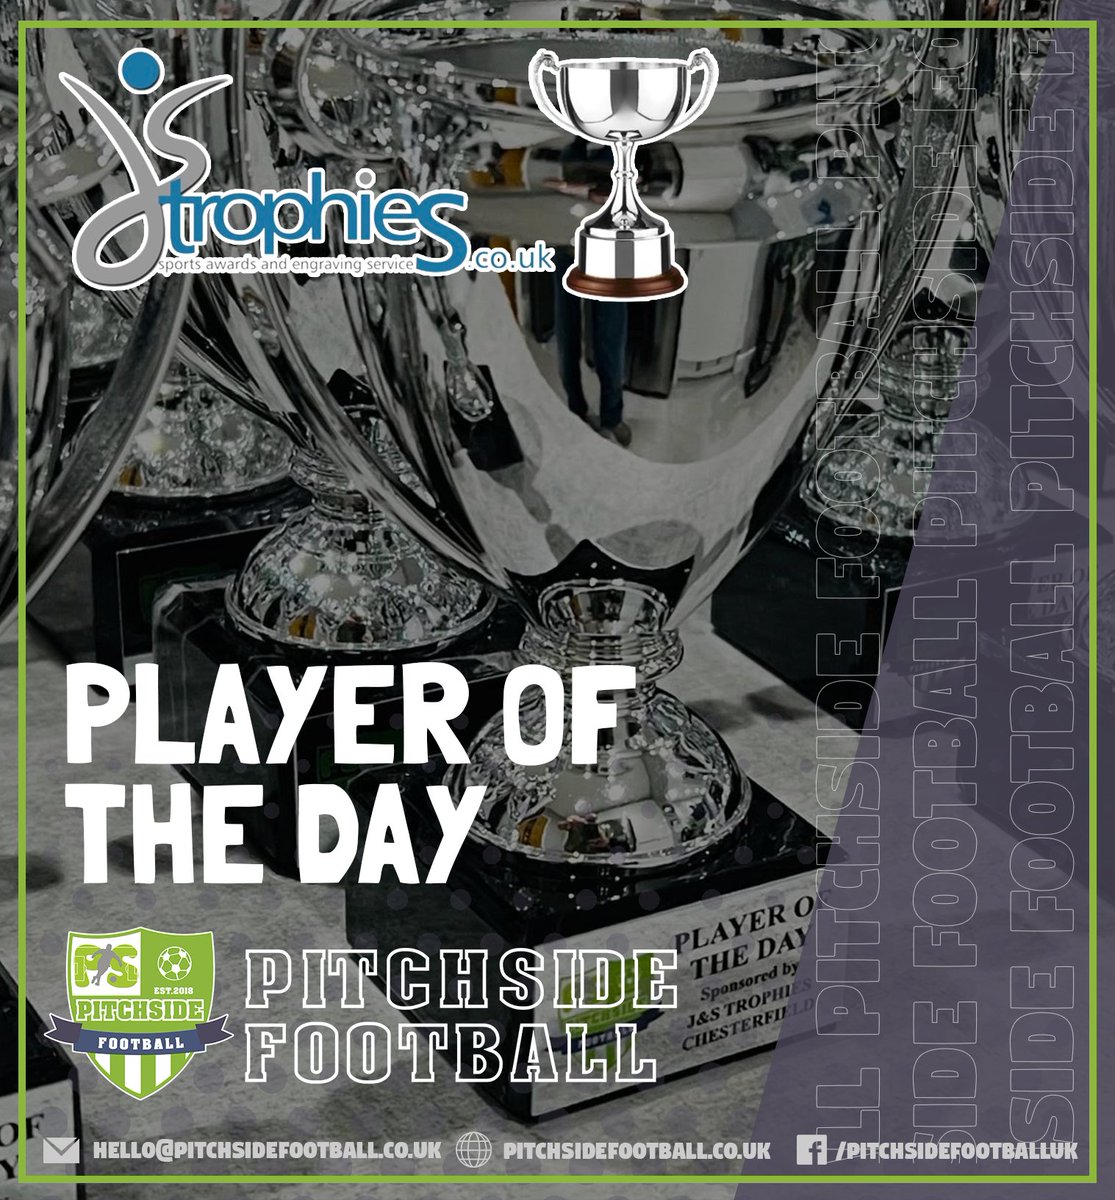 PLAYER OF THE DAY | 🏆 We're thrilled that JS Trophies will be our exclusive Player of the Day sponsors for our upcoming events! 🏆✨ Get ready to be blown away by the stunning trophies they've organised! 😍

#PitchsideFootball #PlayerOfTheDay #JSTrophies #CelebratingExcellence